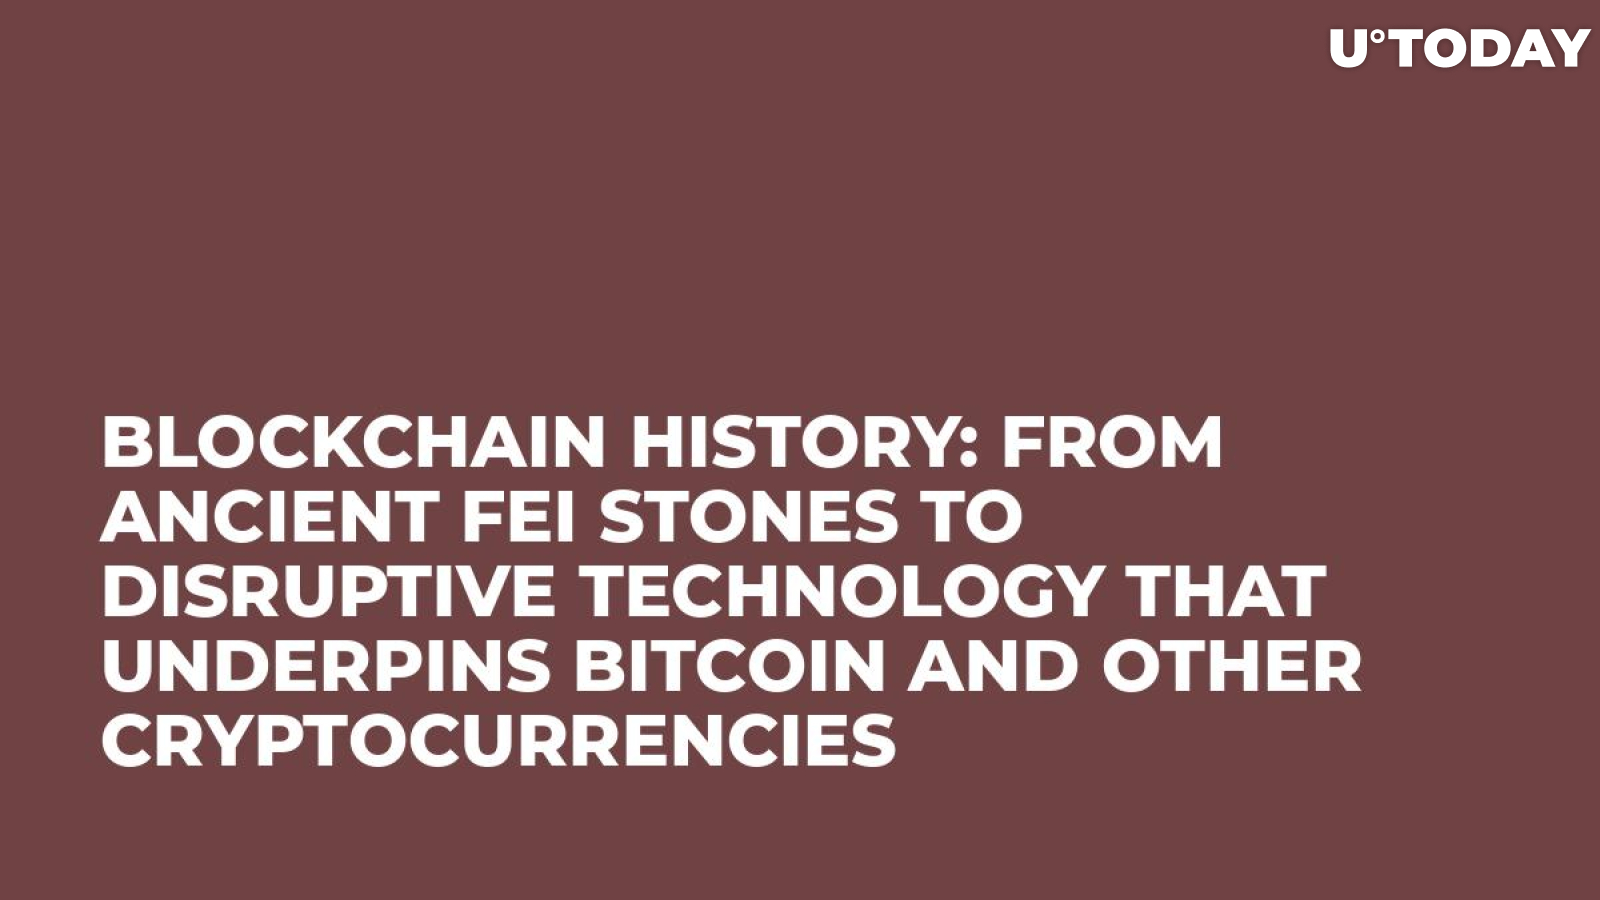 Blockchain History: From Ancient Fei Stones to Disruptive Technology That Underpins Bitcoin and Other Cryptocurrencies